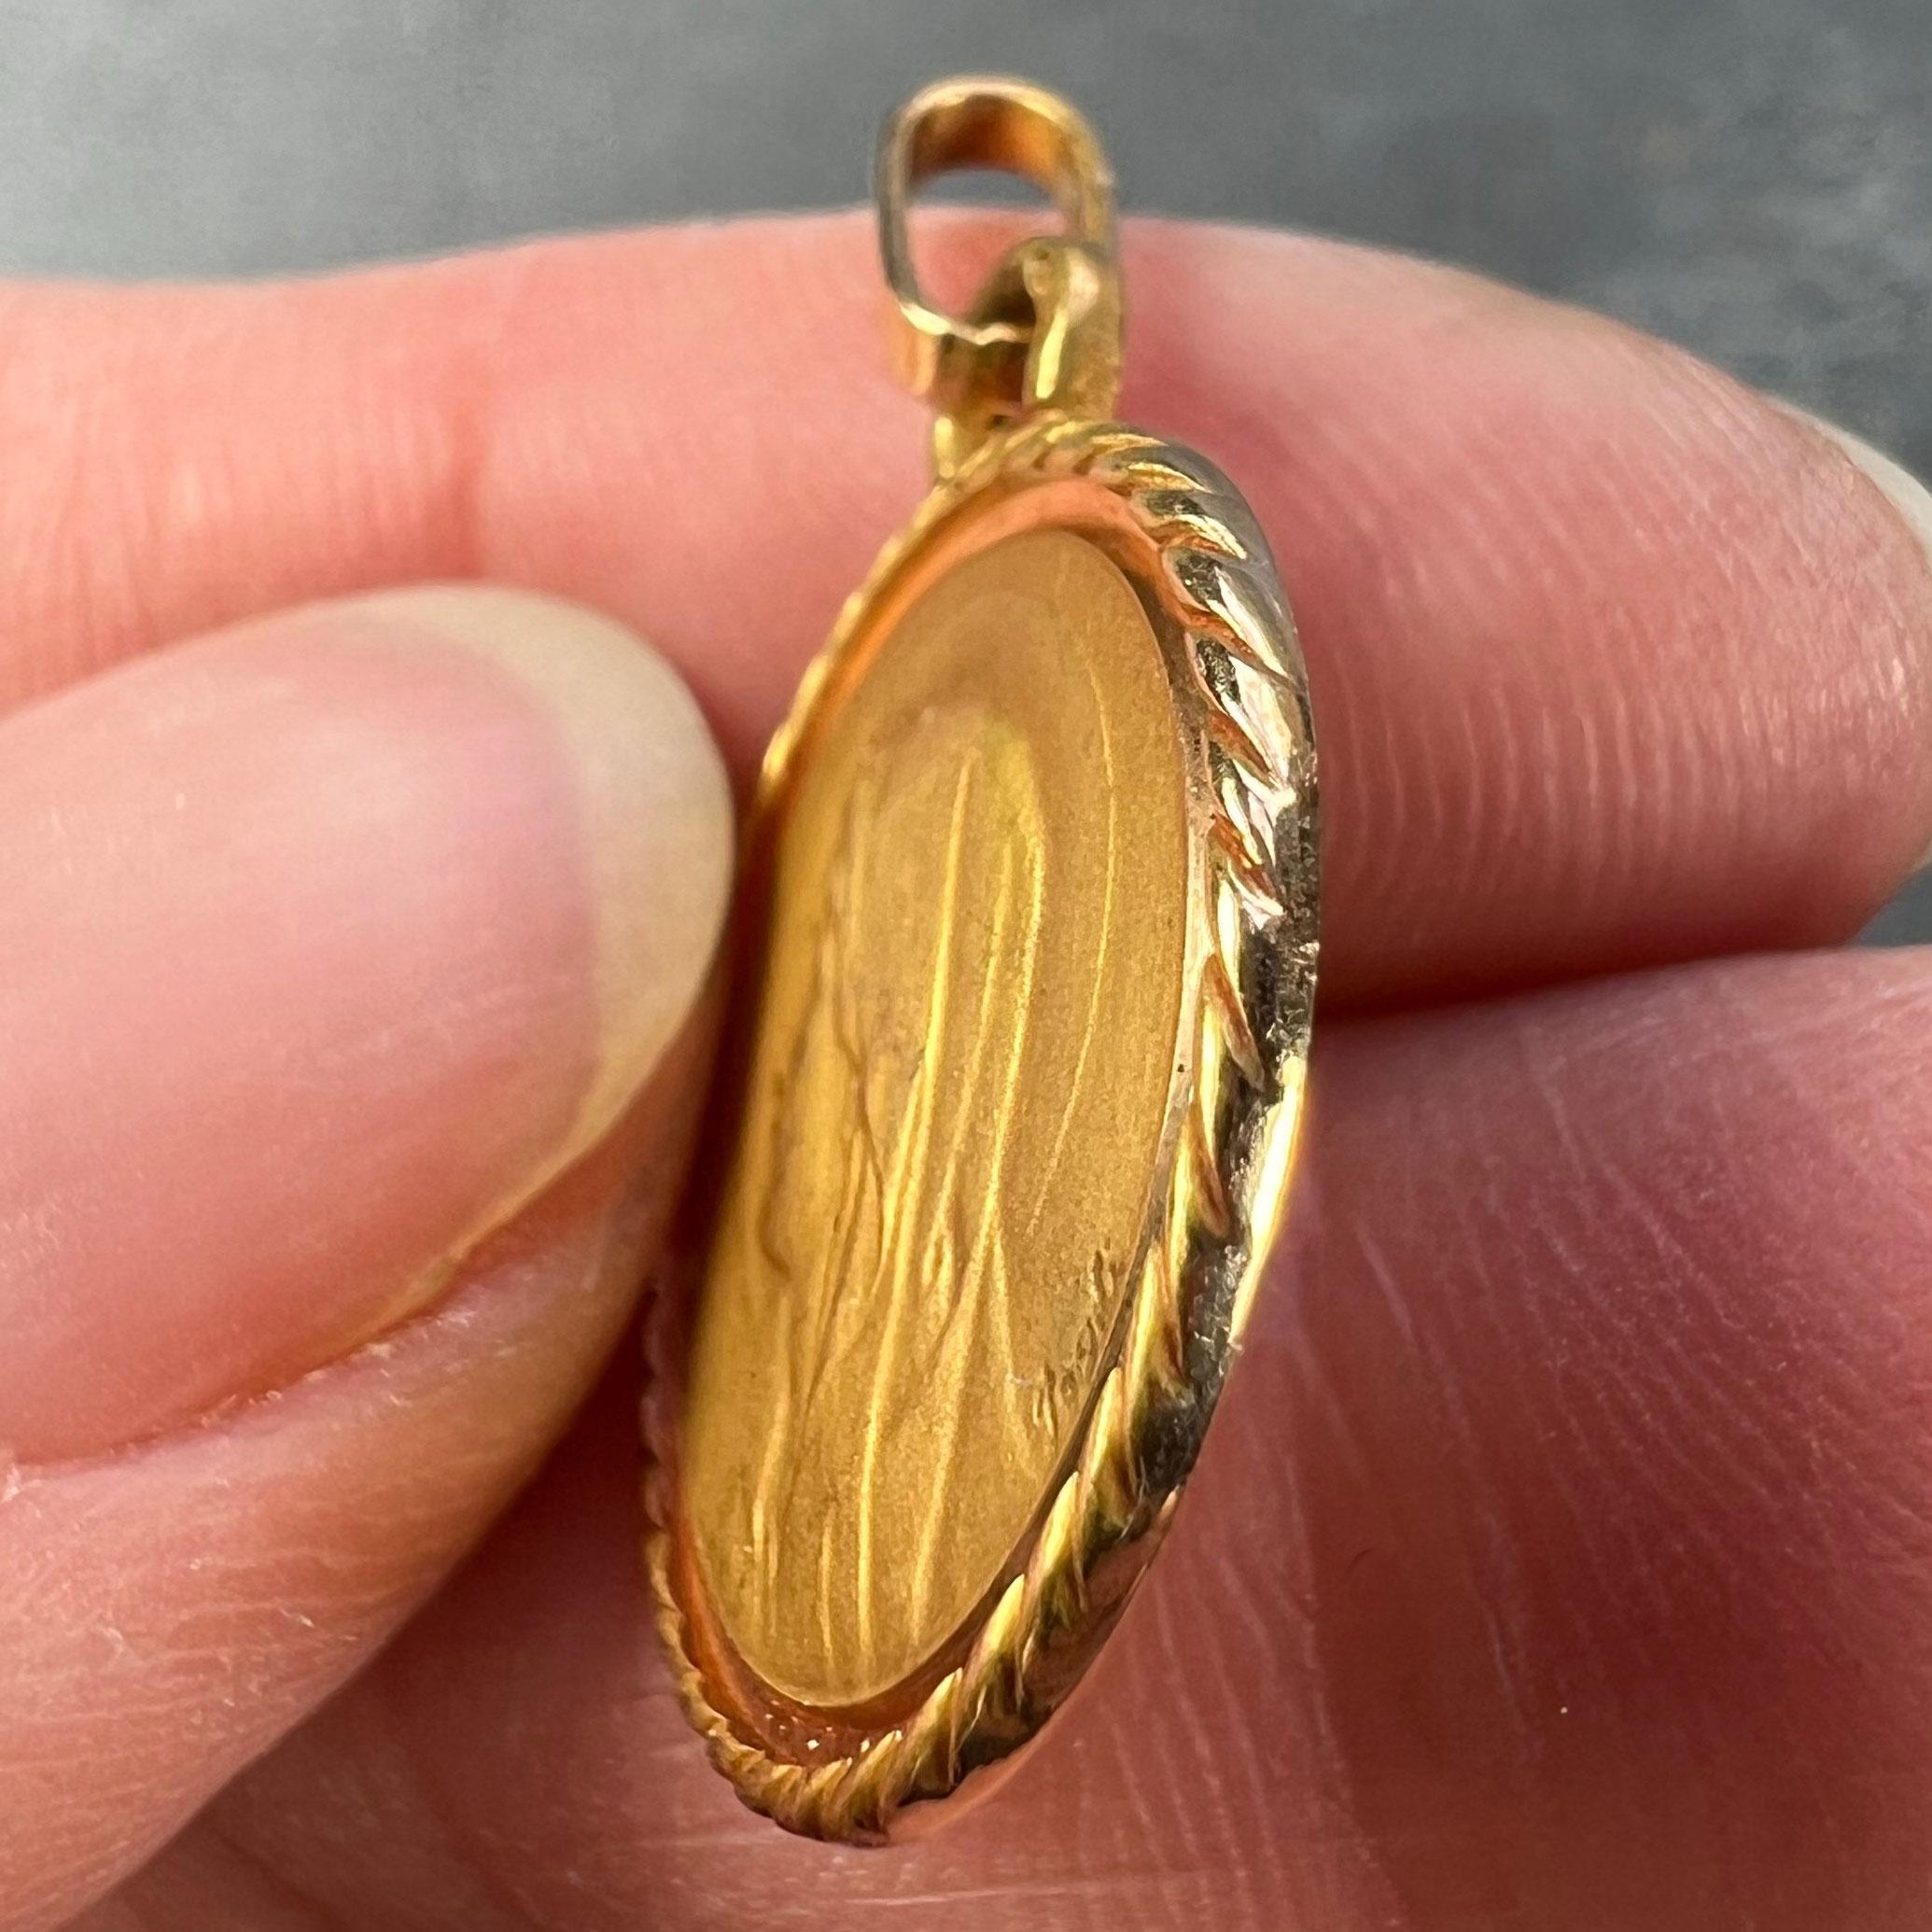 French Perroud Pagdi 18K Yellow Gold Virgin Mary Medal Pendant For Sale 3